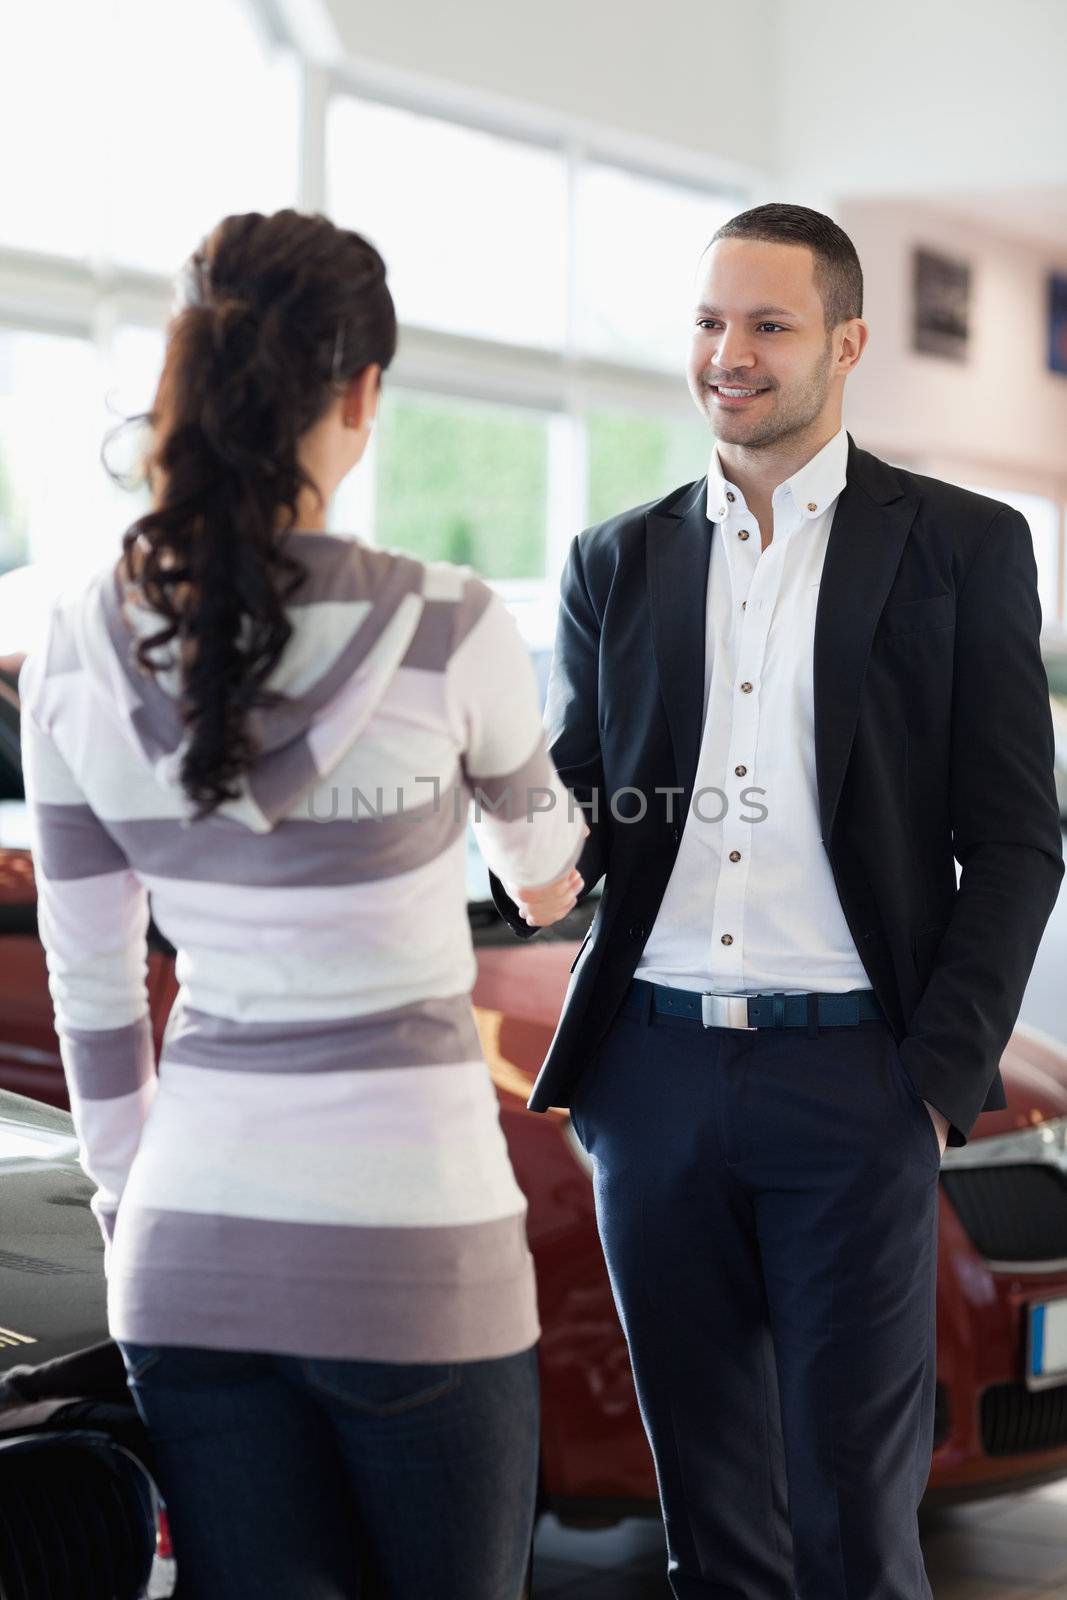 Car dealer shaking hand with a customer in a car shop